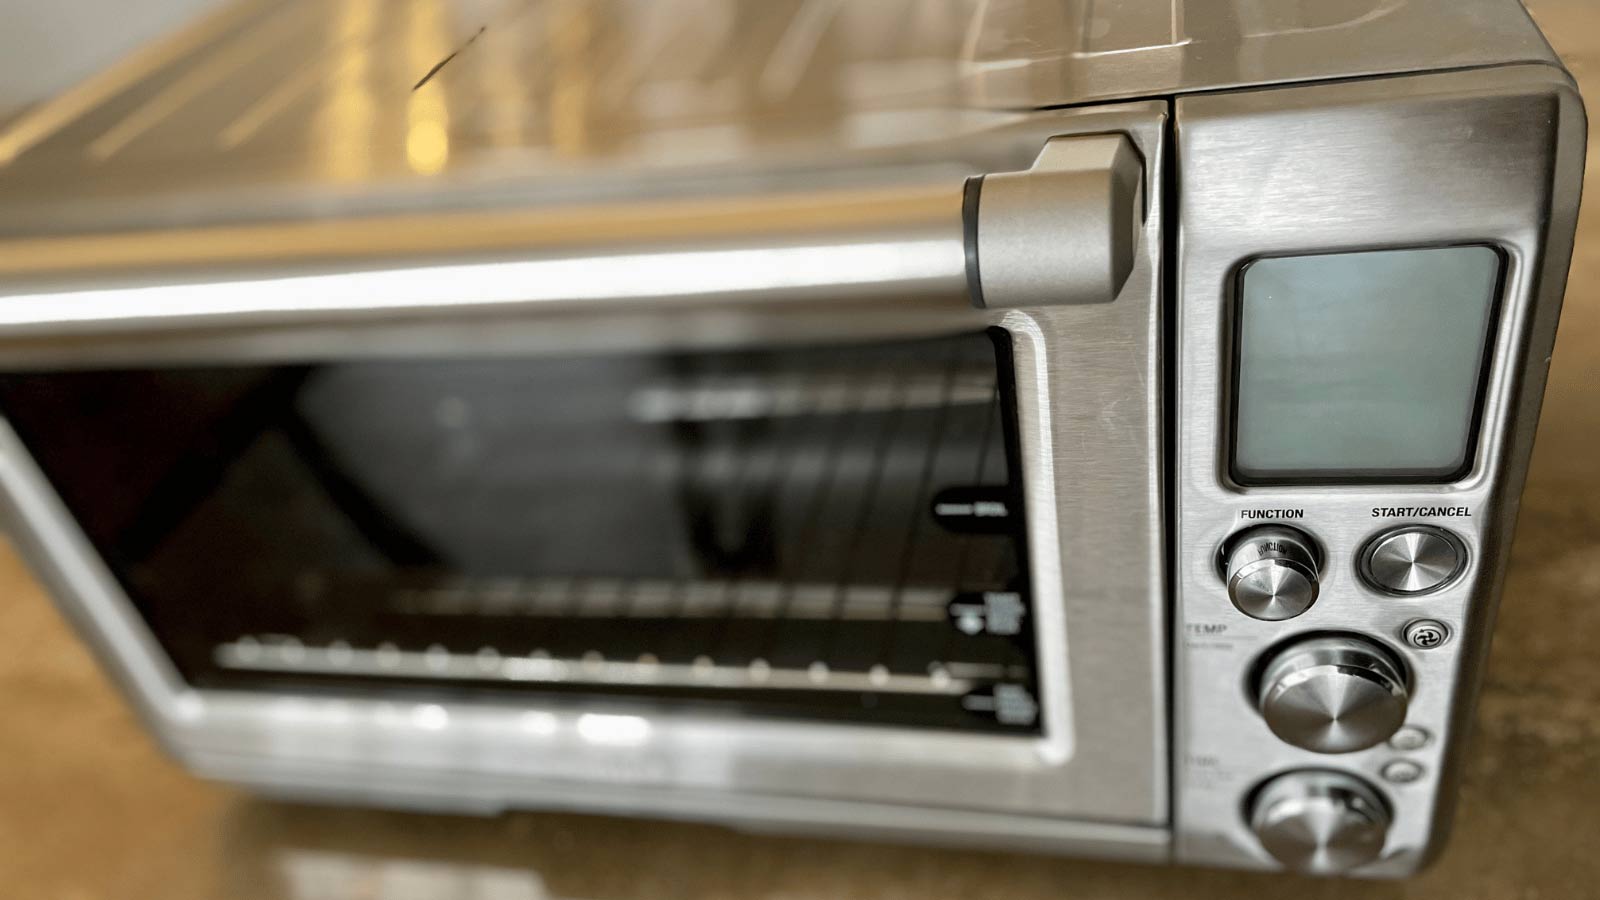 breville smart over toaster over BOX800XL